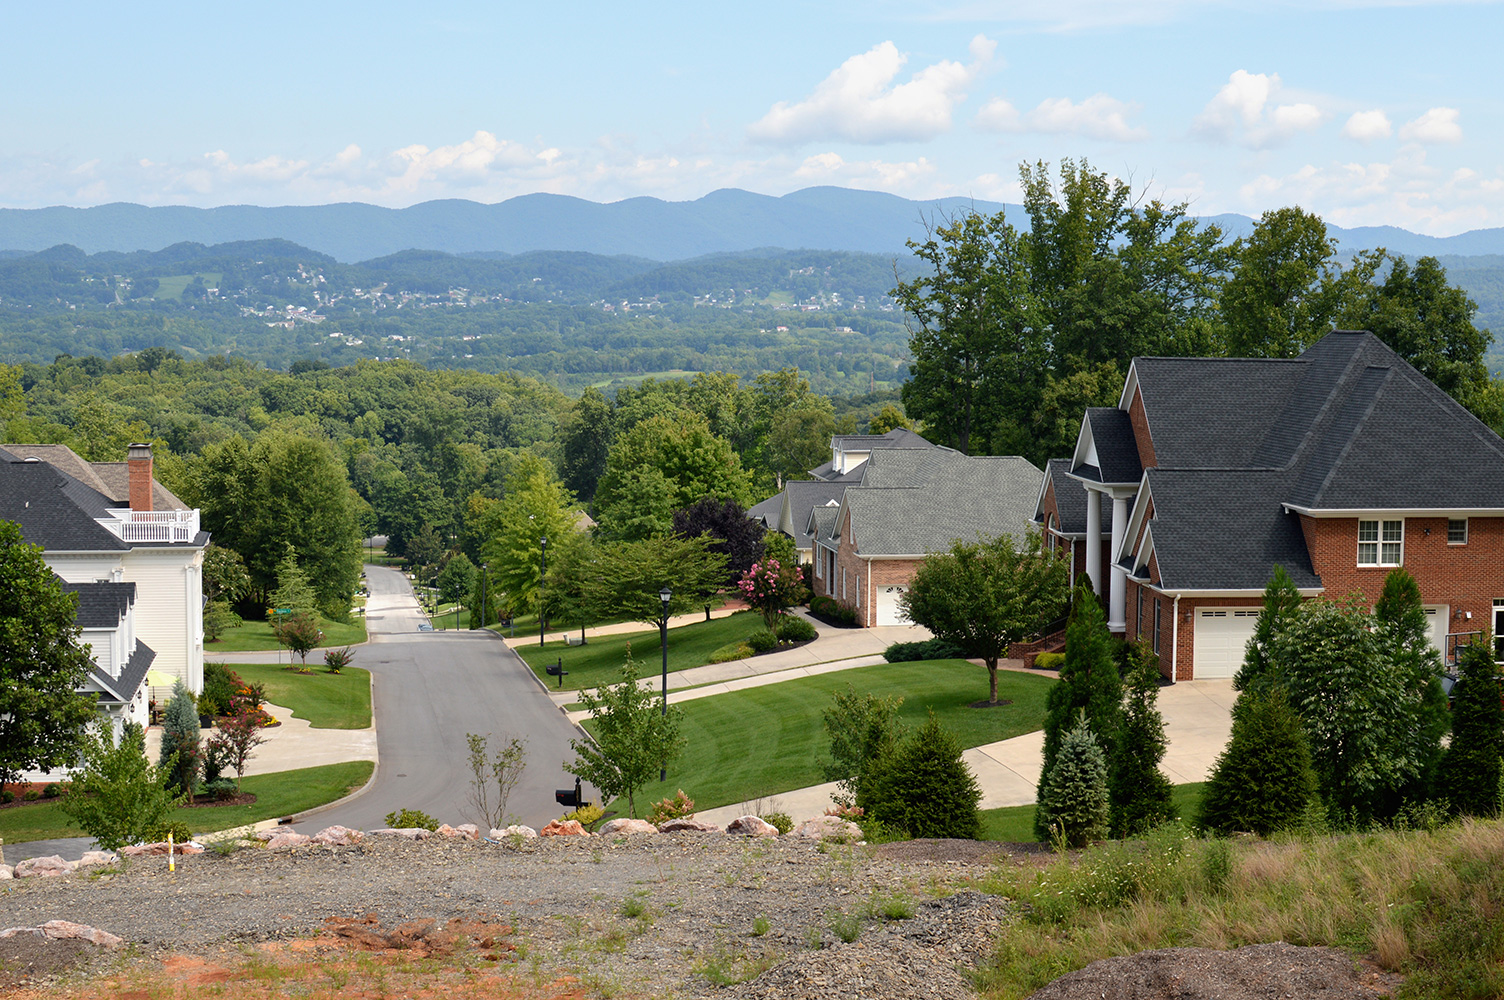 The Preston Park community in Kingsport, Tennessee leads to The Summit